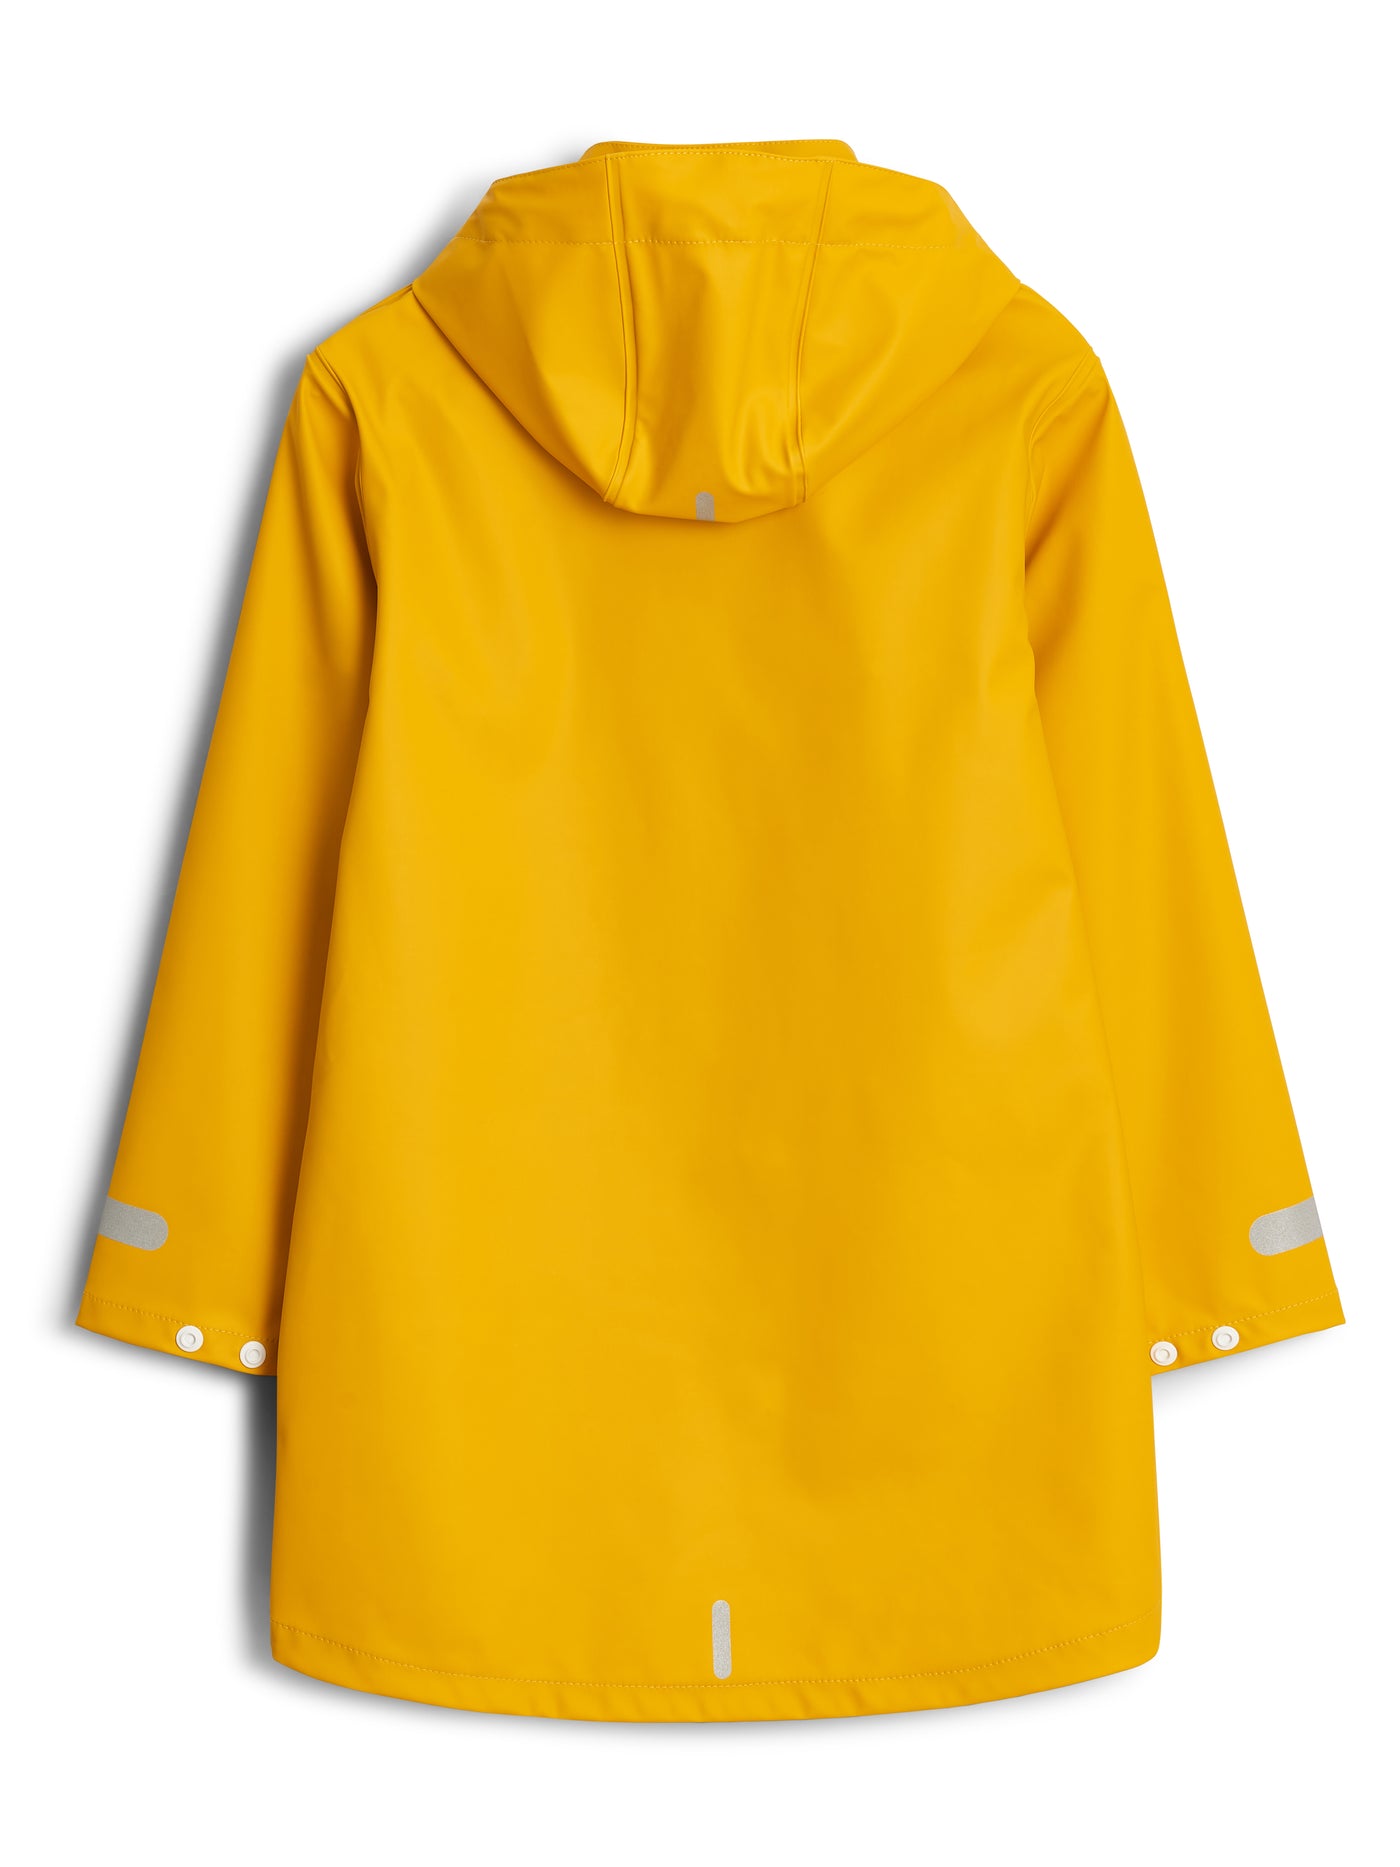 Wings Rainjacket Jr - Raincoat for children and young people